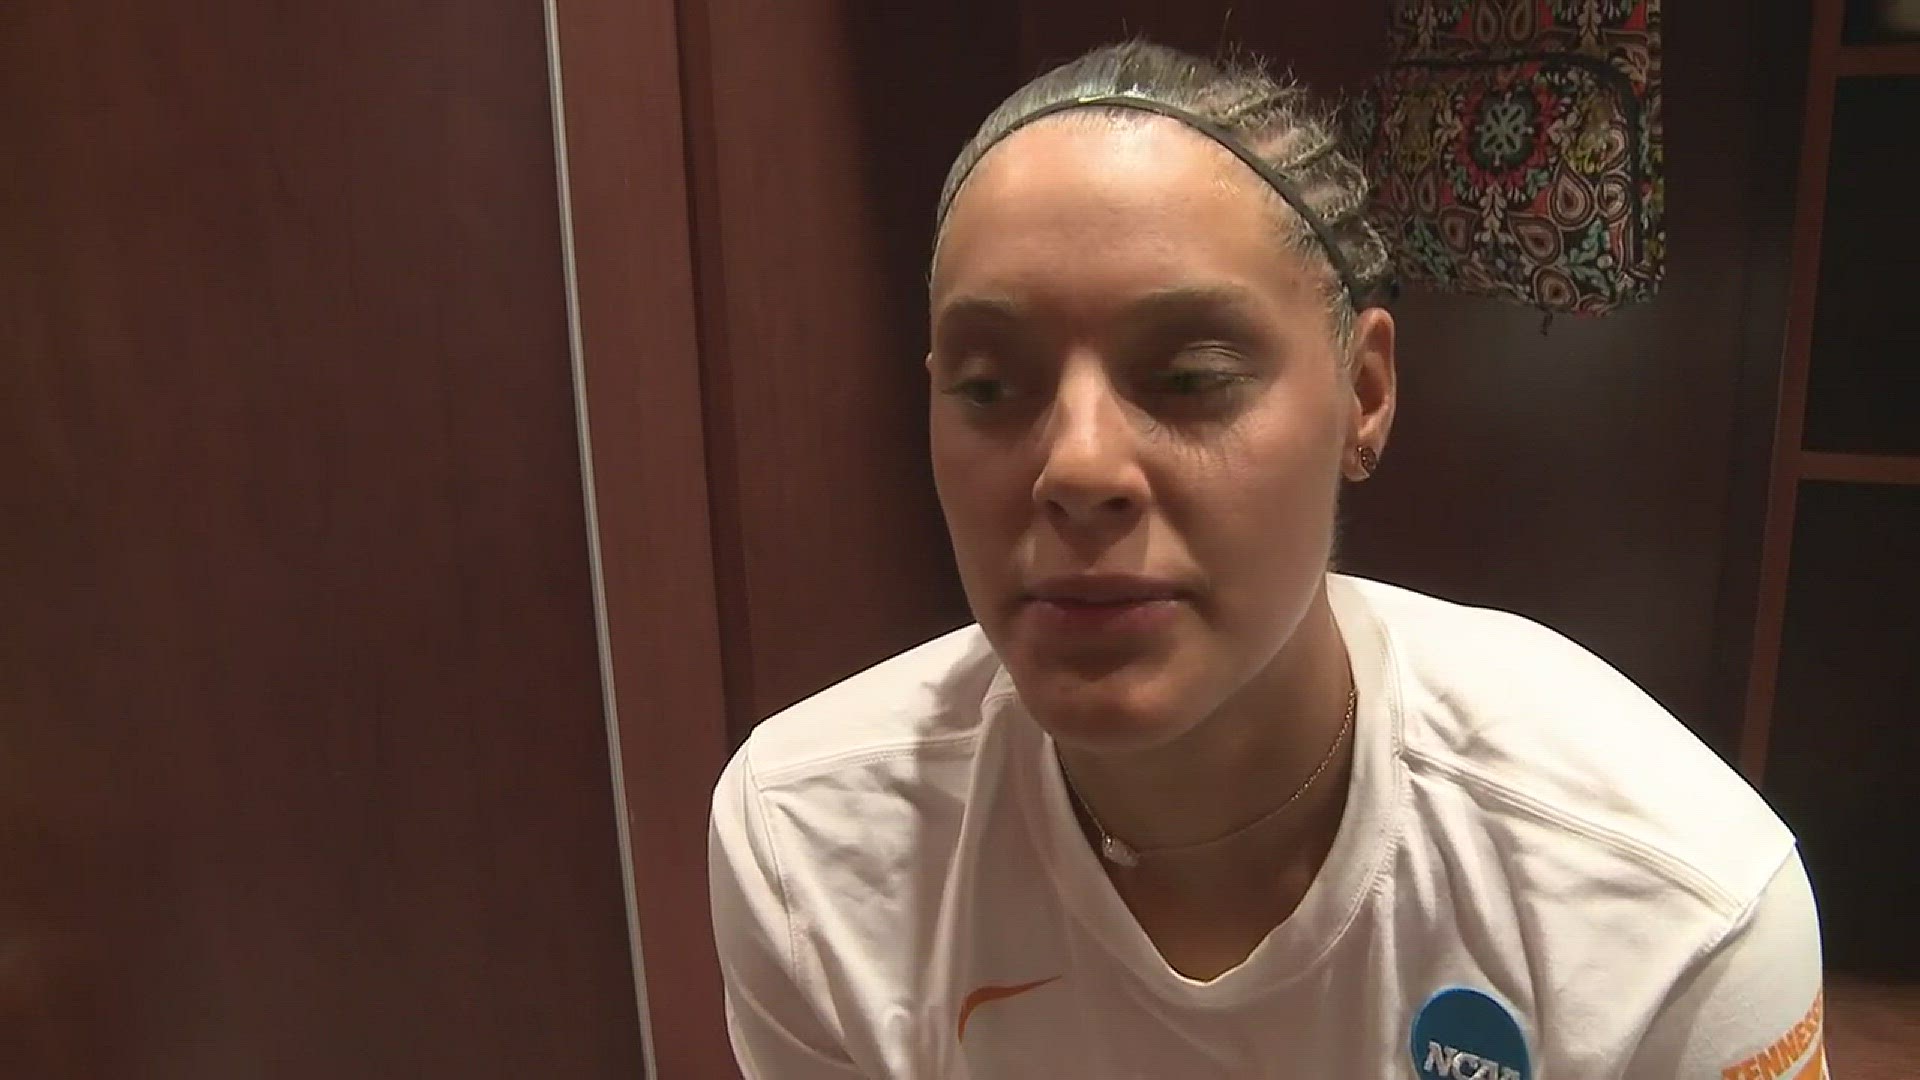 The Lady Vols beat Liberty 100-60 in the first round of the NCAA Tournament.